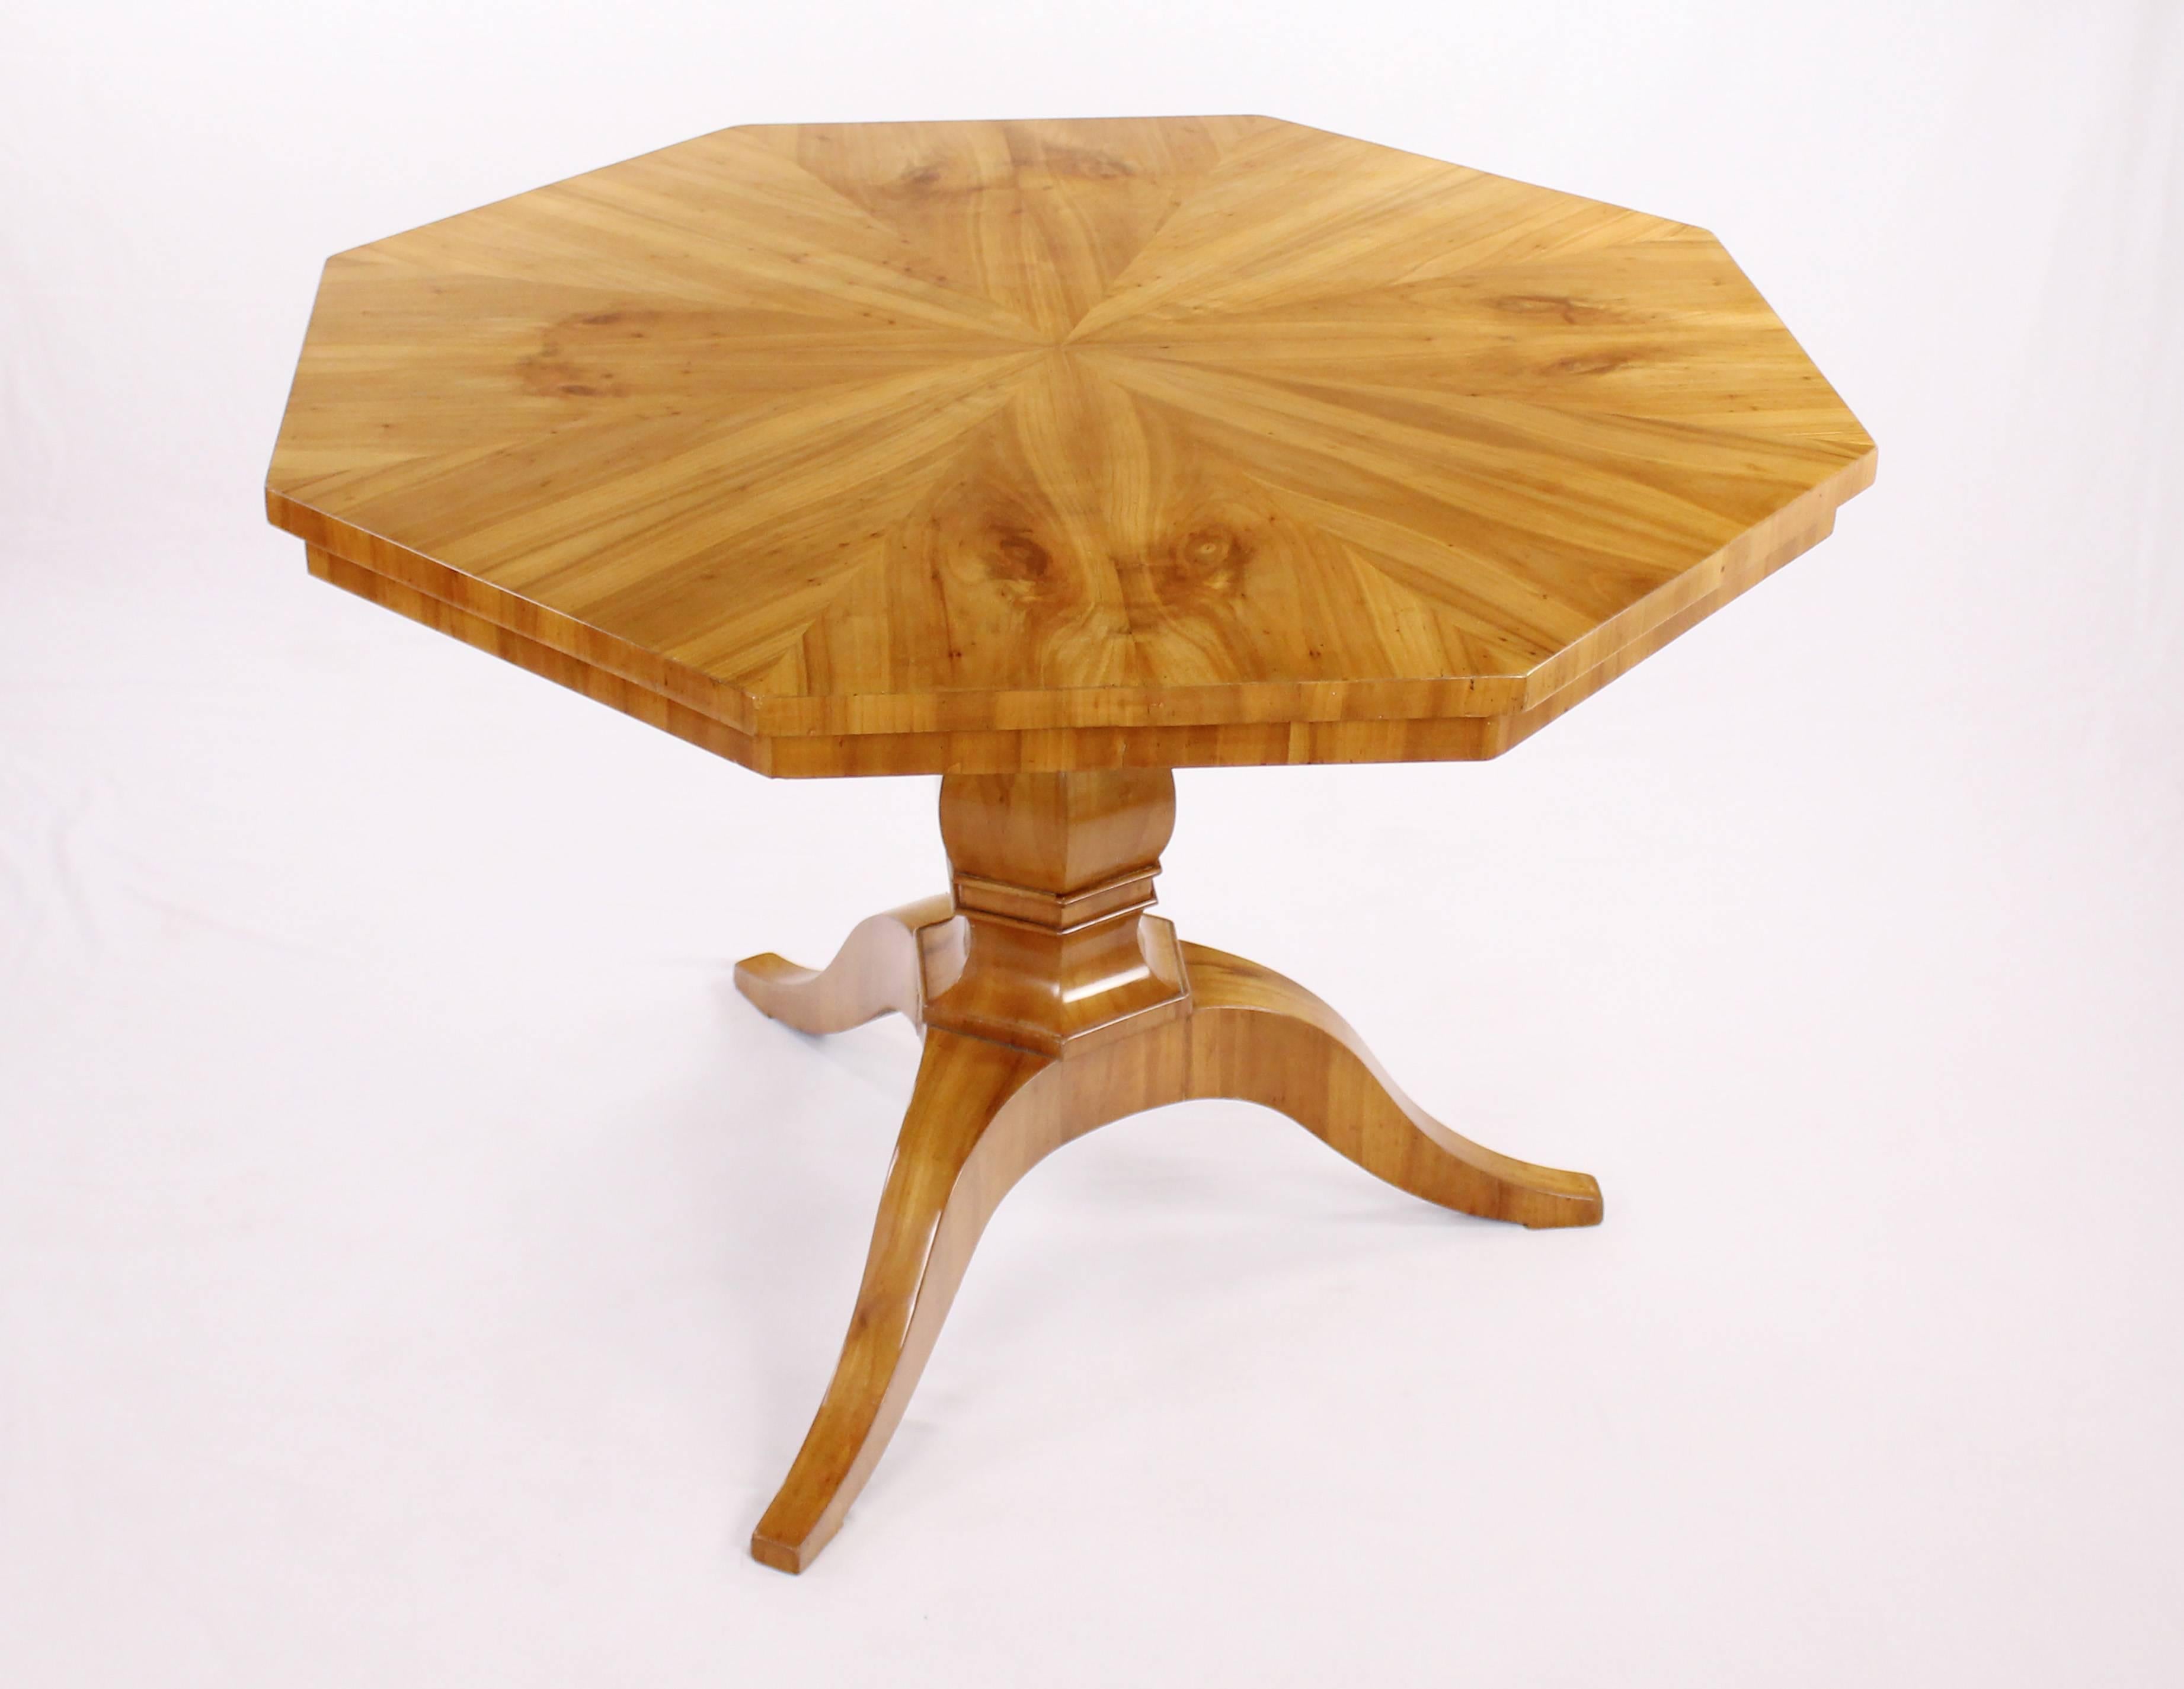 • Biedermeier period drawing room table, circa 1830-1840
• Cherry tree veneered
• Octagonally
• Hinged record
• Restored residential-ready state
• Shellac polish
• Height: 80 cm, width: 110 cm, depth: 110 cm

Delivery can be made to your